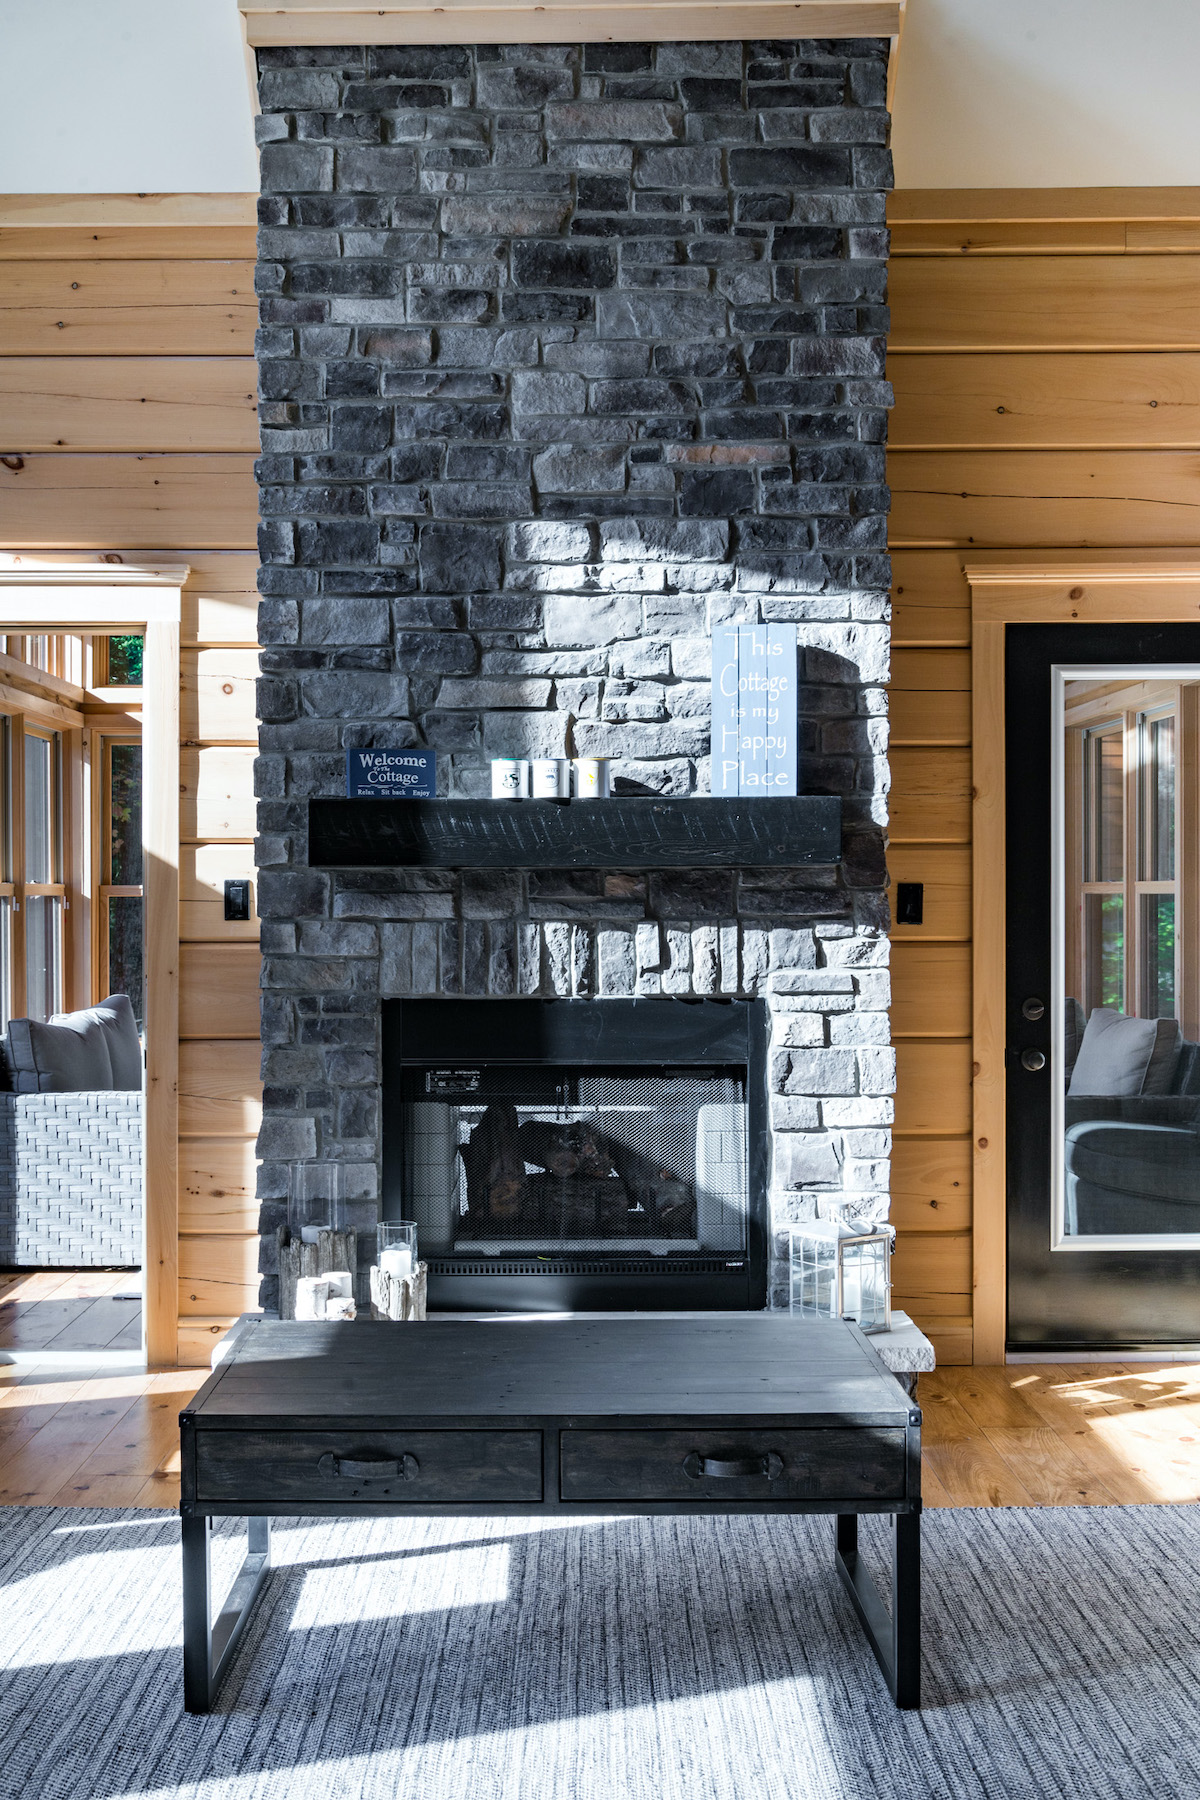 Ayers Cliff fireplace 9180